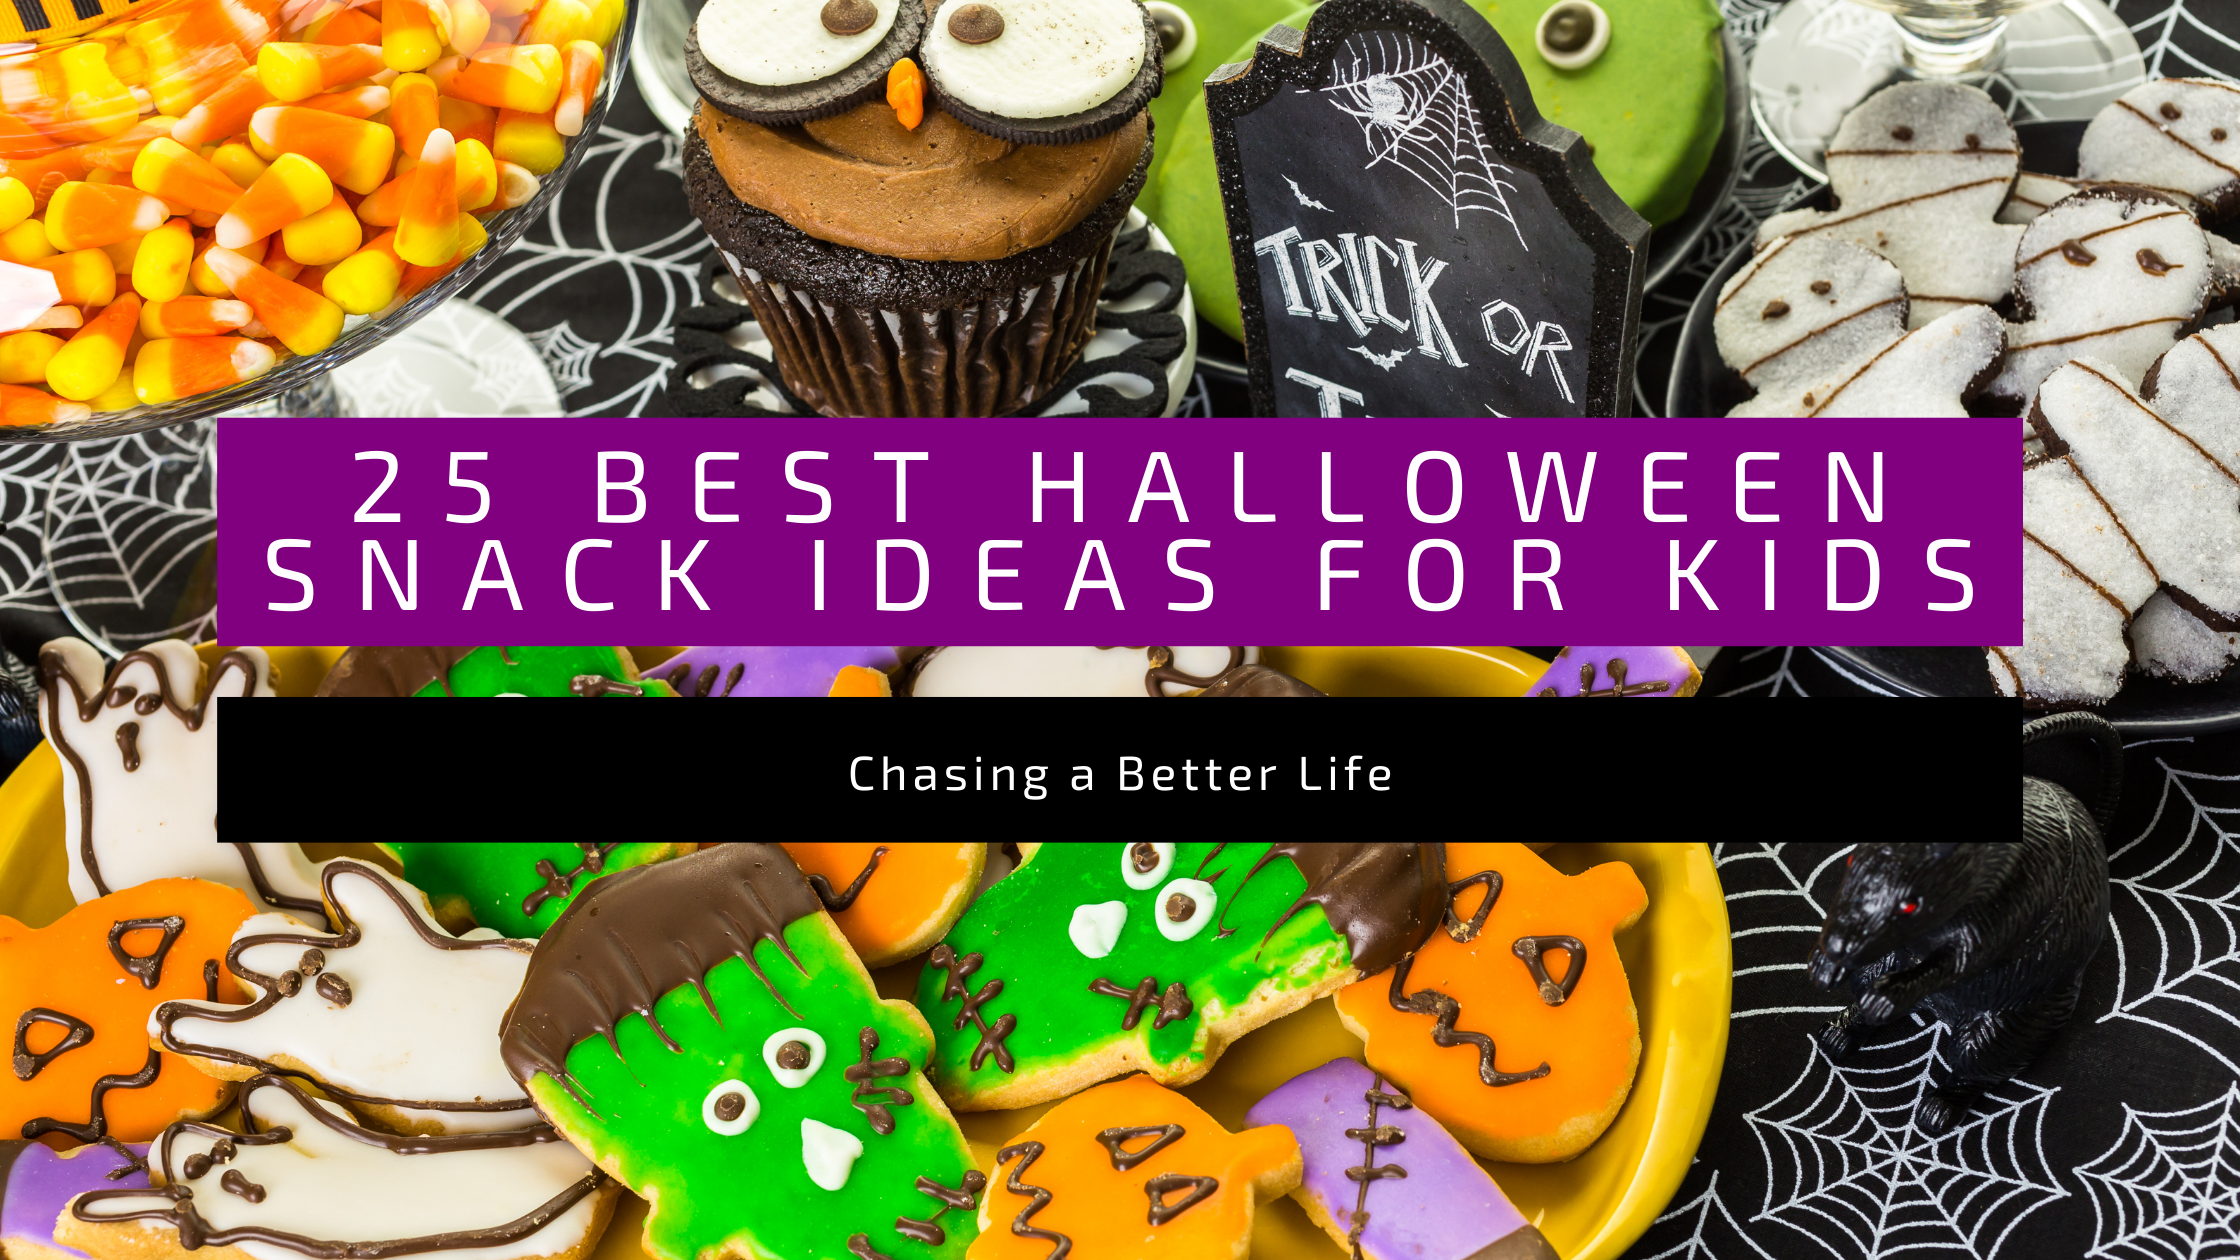 The 25 Best Halloween Snack Ideas for Kids 7